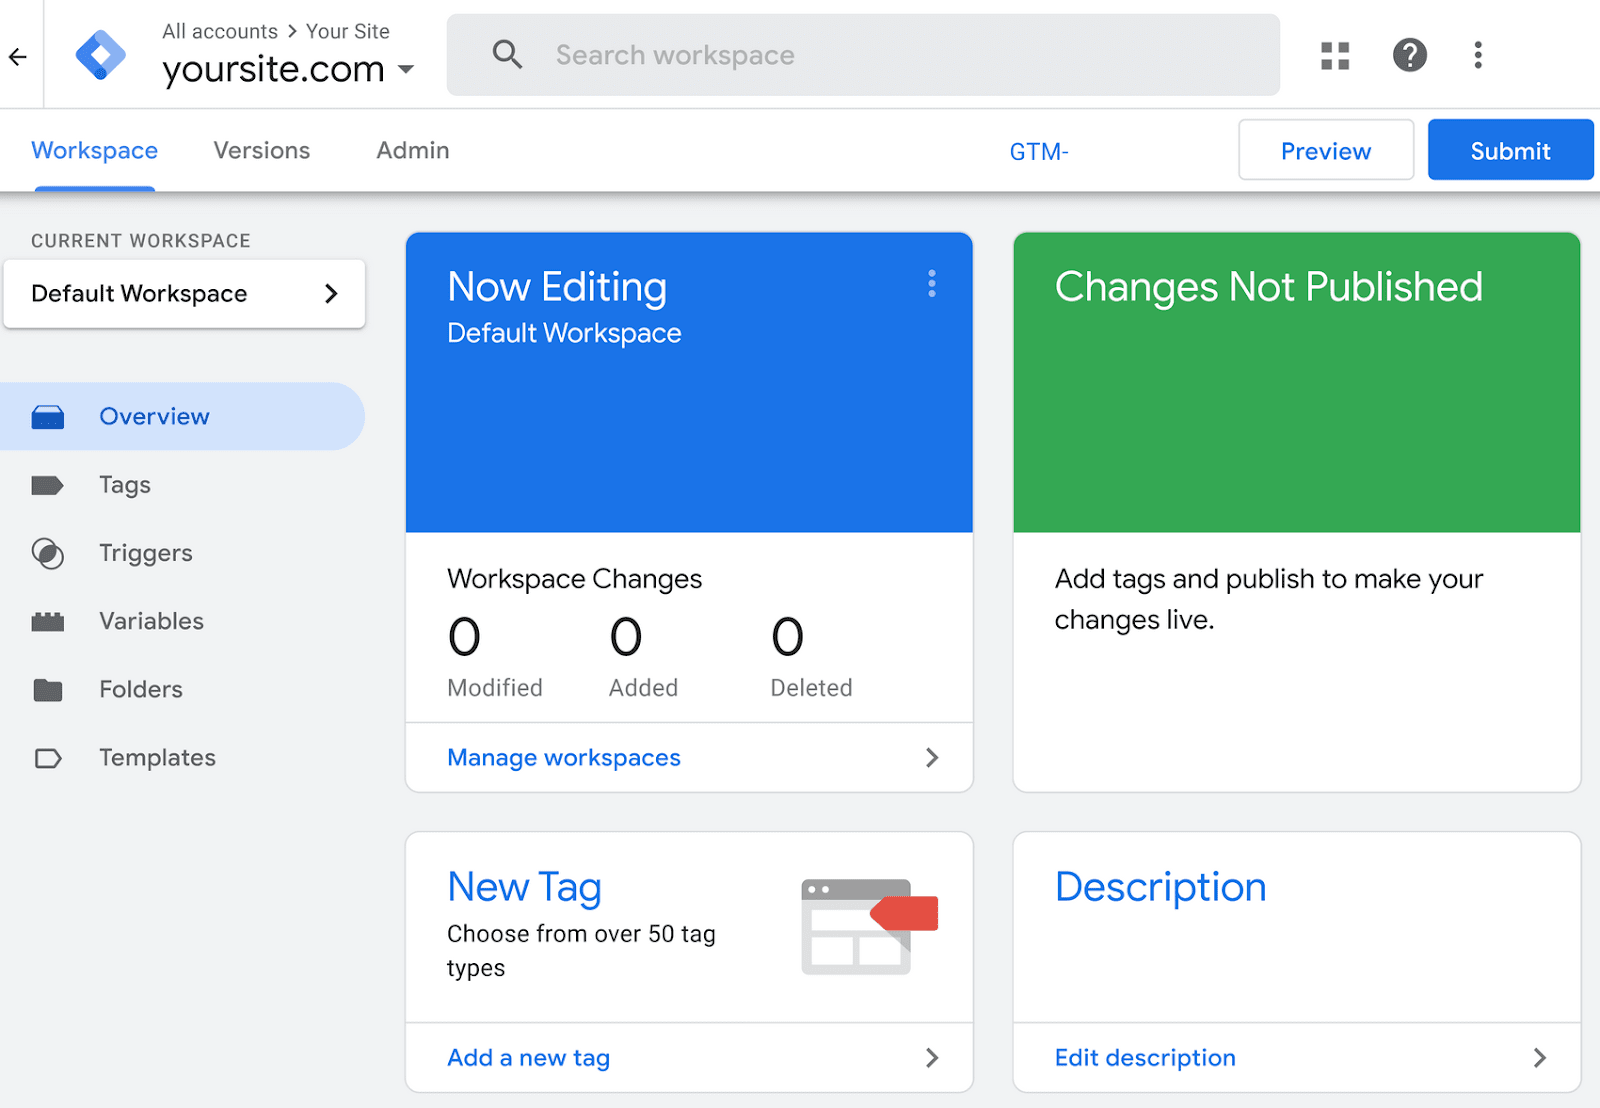 “Overview” section of Google Tag Manager container